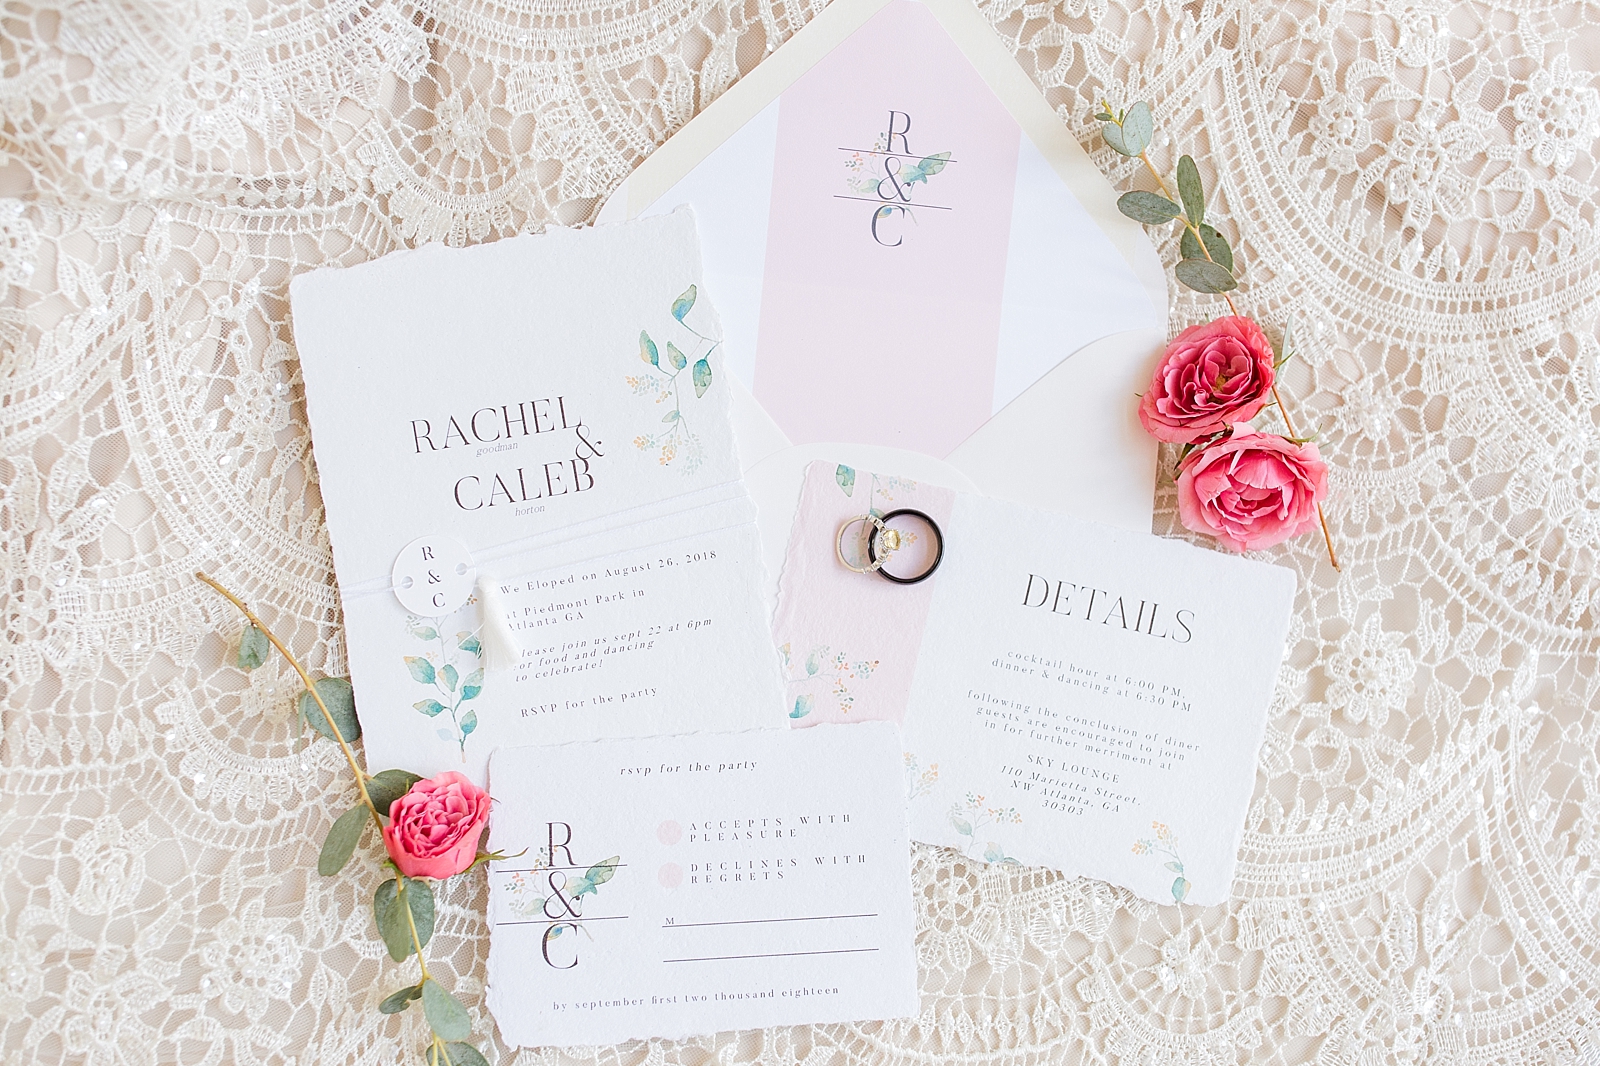 Atlanta Georgia Elopement Invitation Suite with pink roses and wedding rings on lace dress Photo